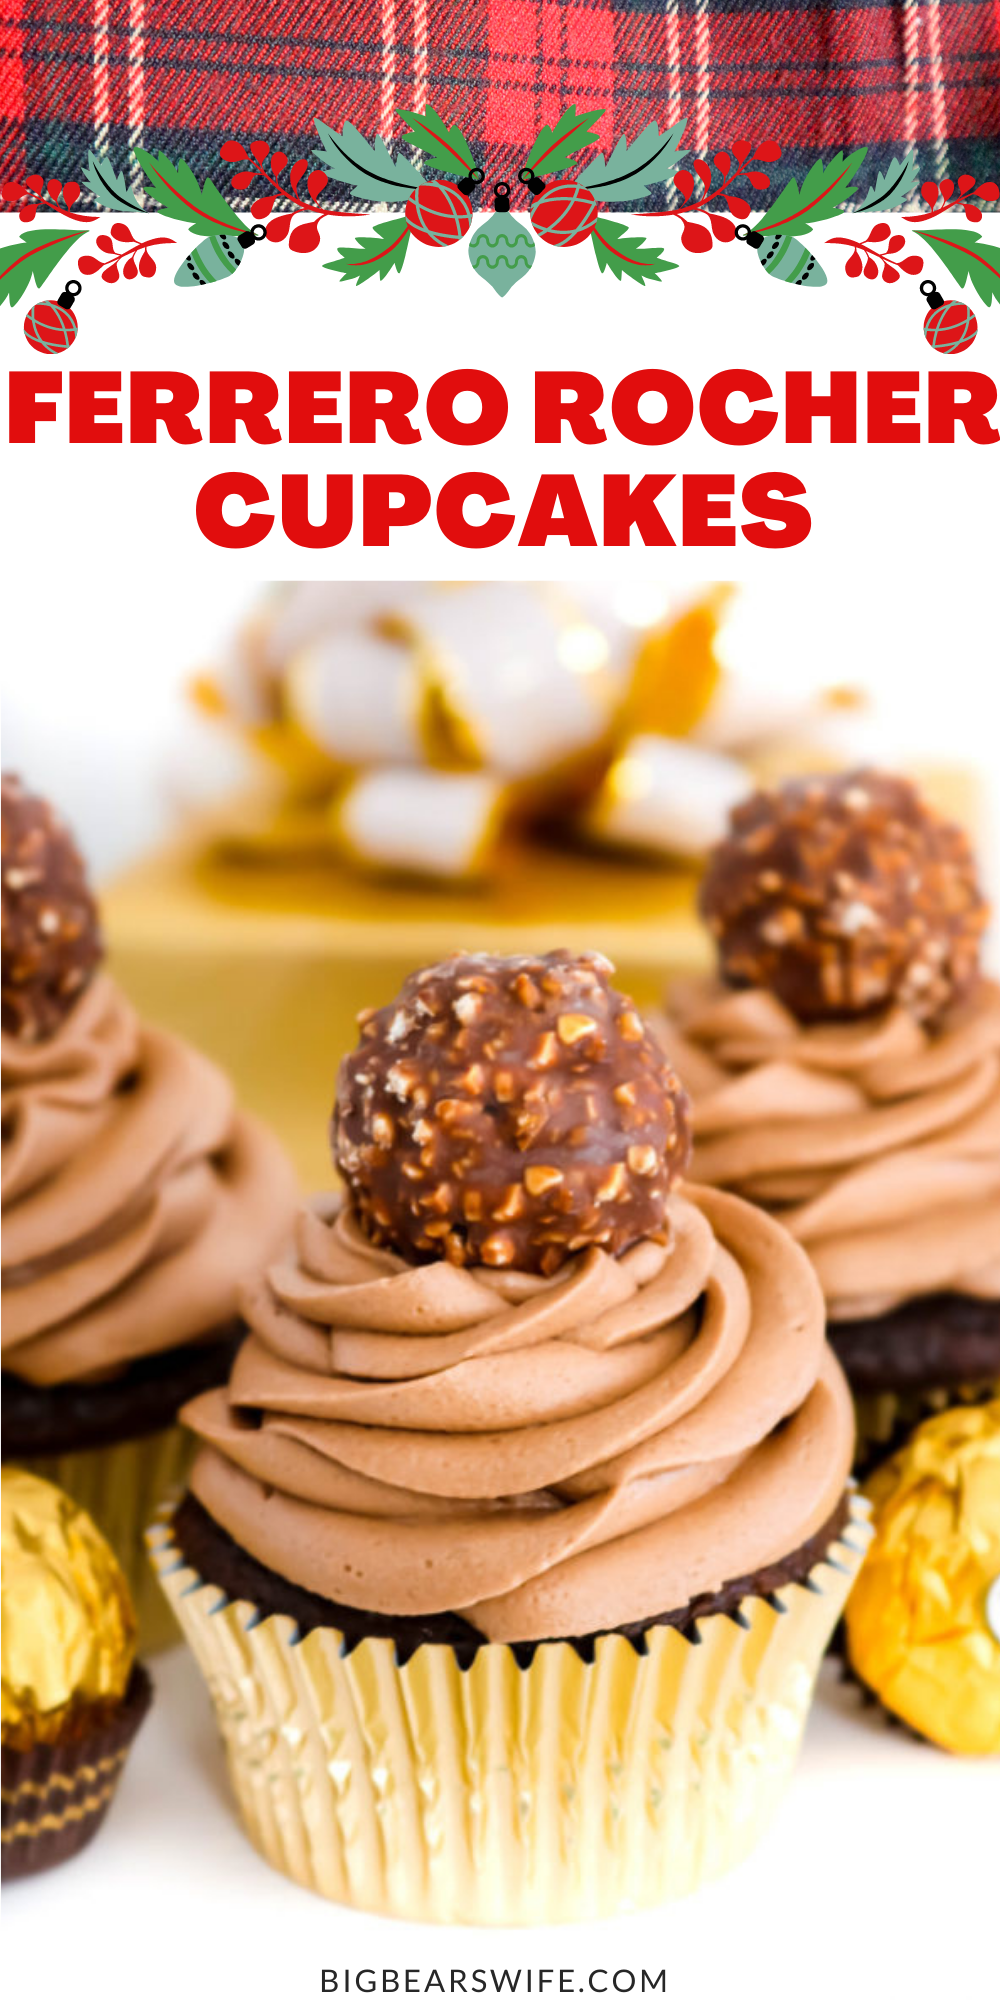 Love Ferrero Rocher Candies? Then these Ferrero Rocher Cupcakes are going to be your new favorite dessert! Homemade Chocolate cupcakes with a chocolate hazelnut frosting is topped with a Ferrero Rocher Chocolate and dressed in a gold cupcake liner for the most elegant cupcake ever.  via @bigbearswife